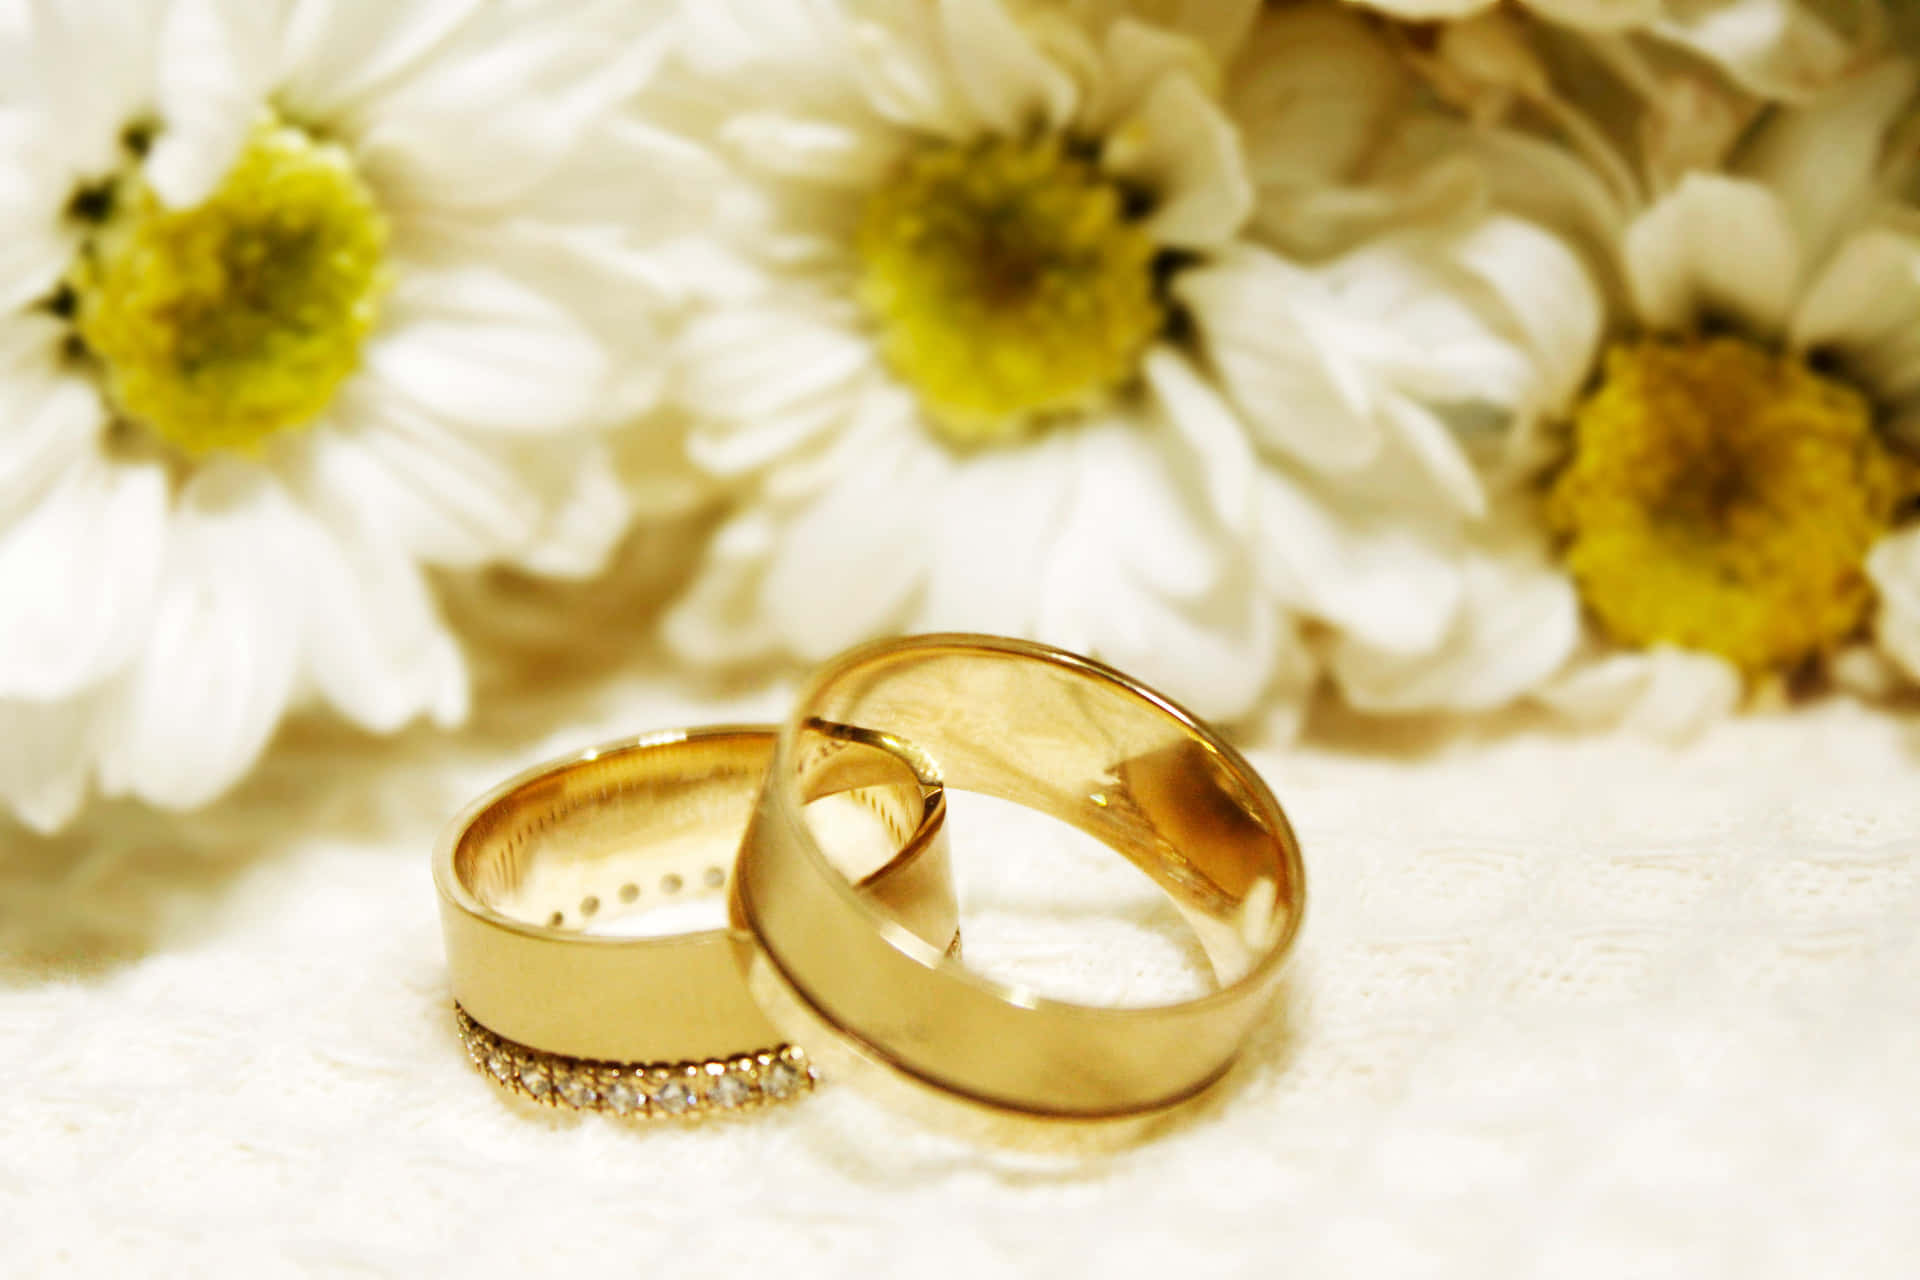 Daisy Flowers Wedding Rings Pictures